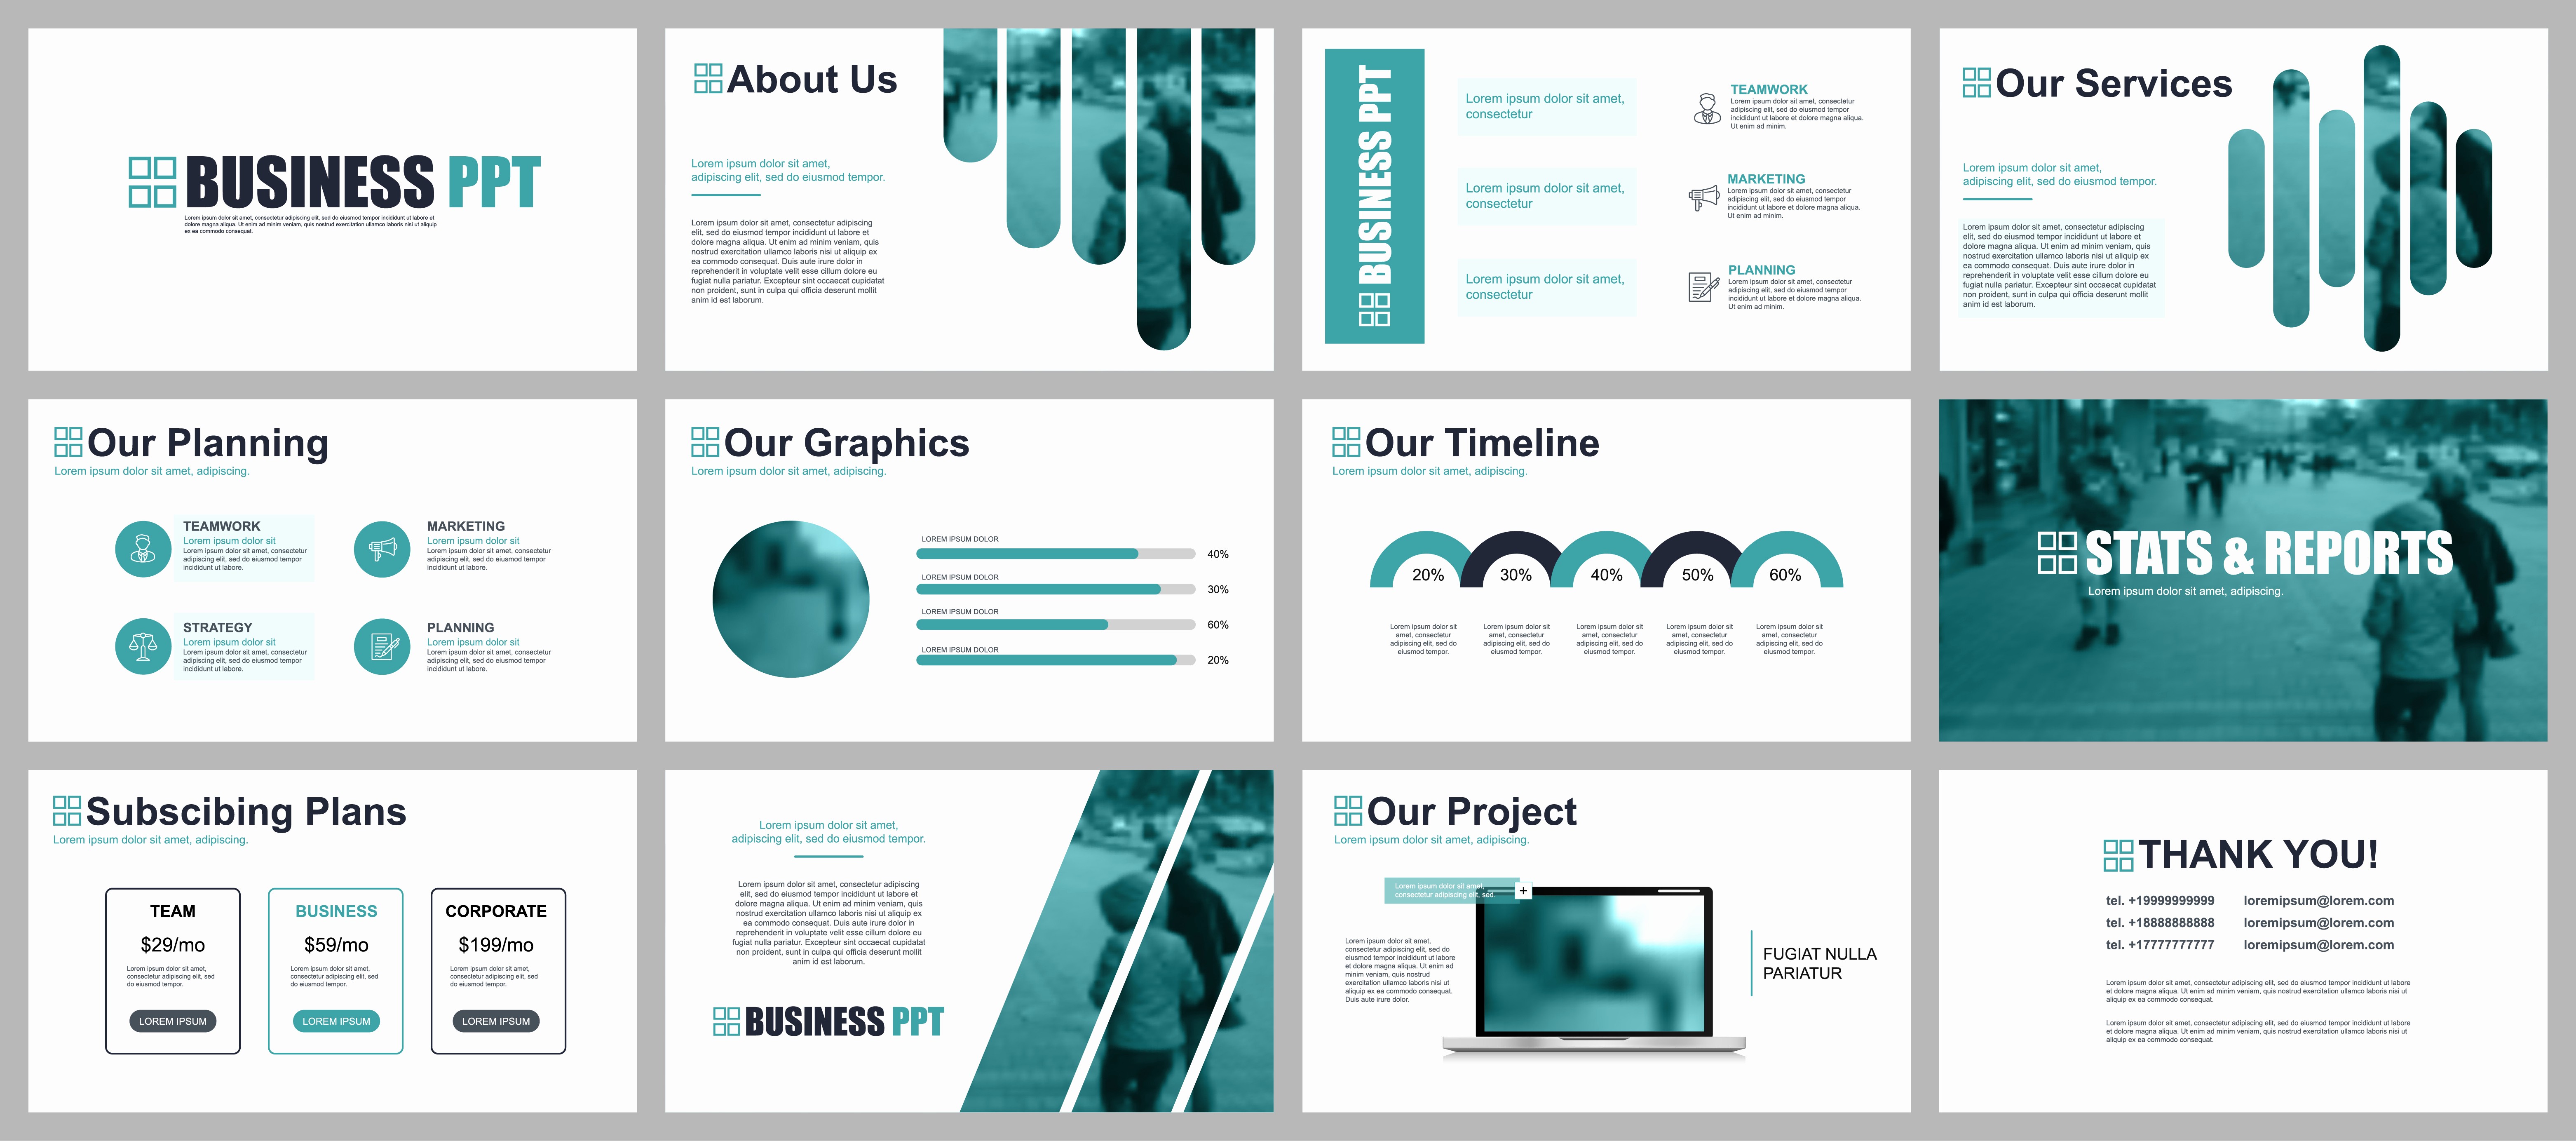 Ppt Templates for Business Presentation Best Of Business Presentation Powerpoint Slides Templates